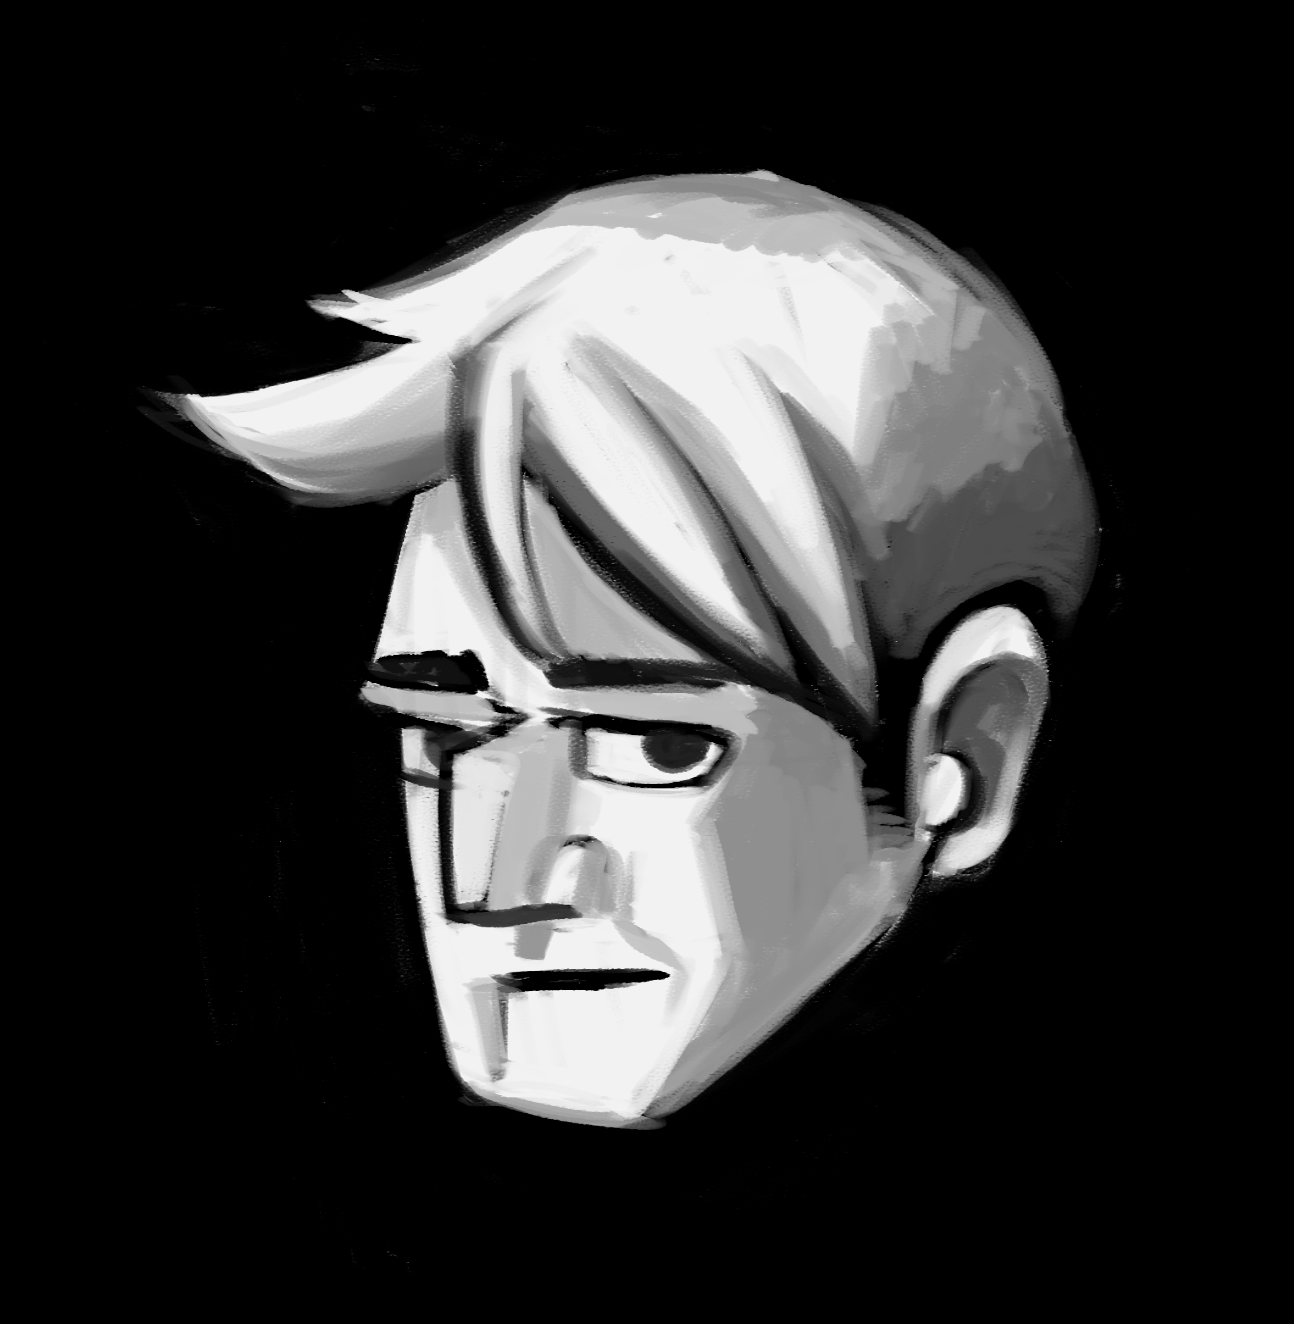 A black and white digital drawing of a face side-eyeing the camera